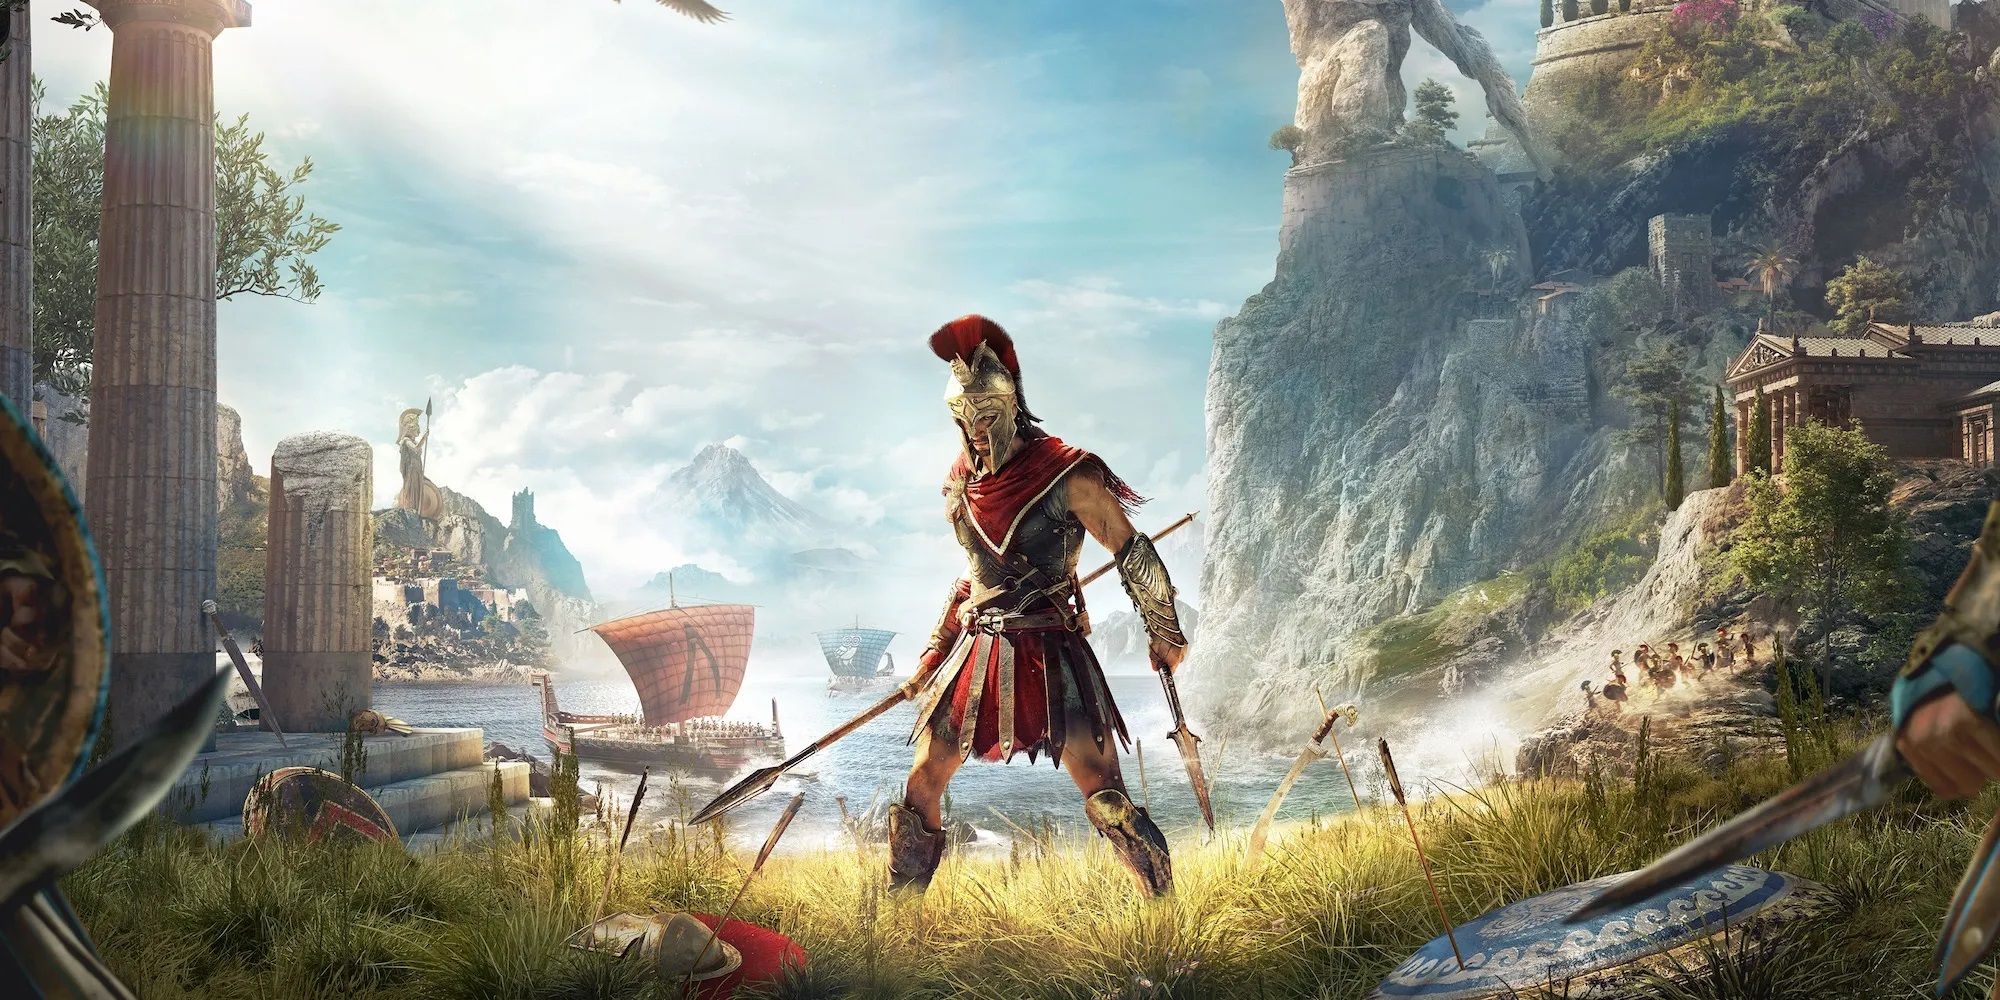 Assassin's Creed Odyssey official poster showing protagonist